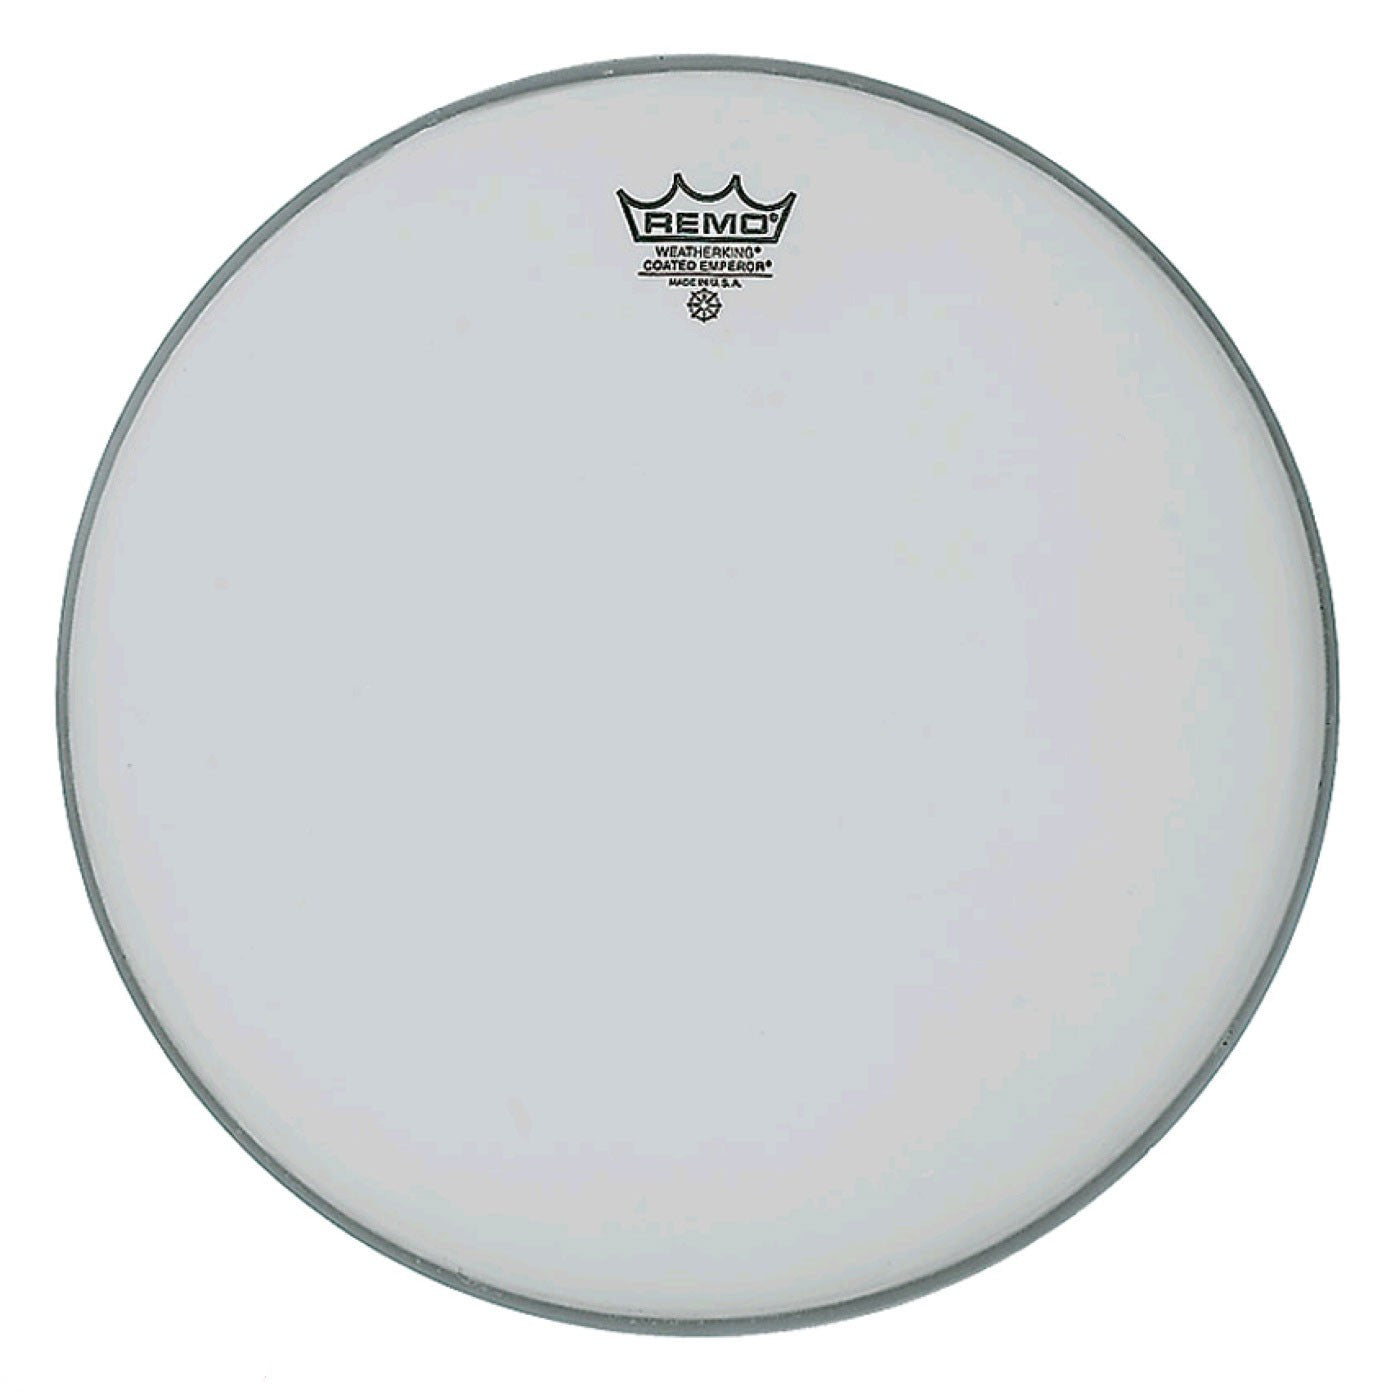 REMO | Emperor | 12" Coated Drum Head | Drum Skin | BE-0112-00 | Piano Time | South Melbourne